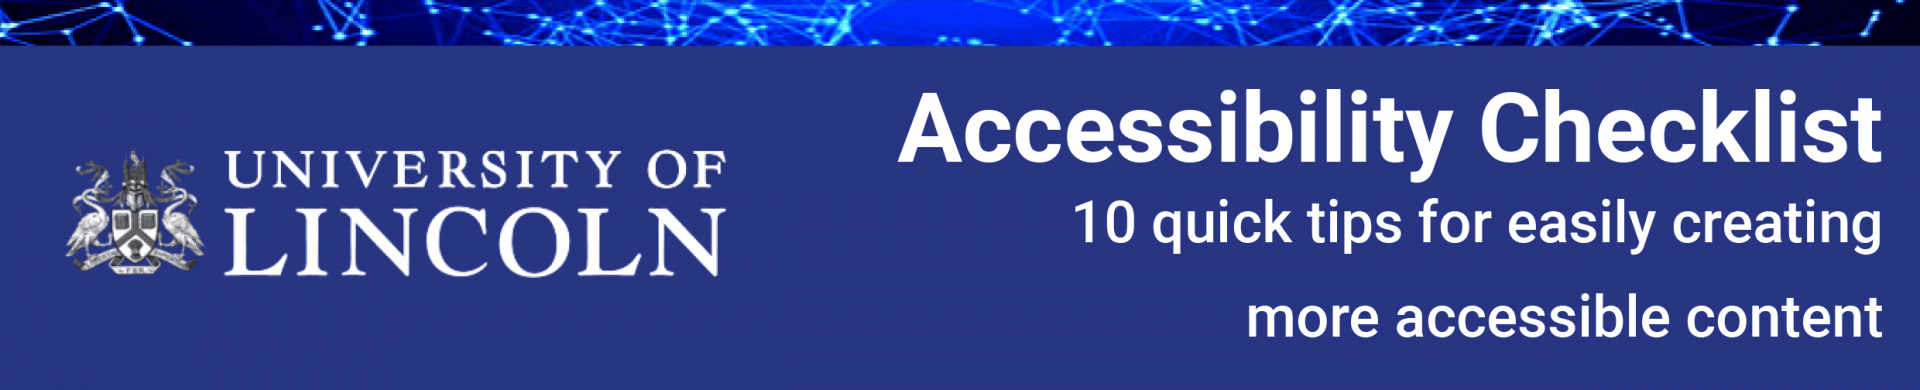 Accessibility Checklist - 10 quick tips for easily creating more accessible content